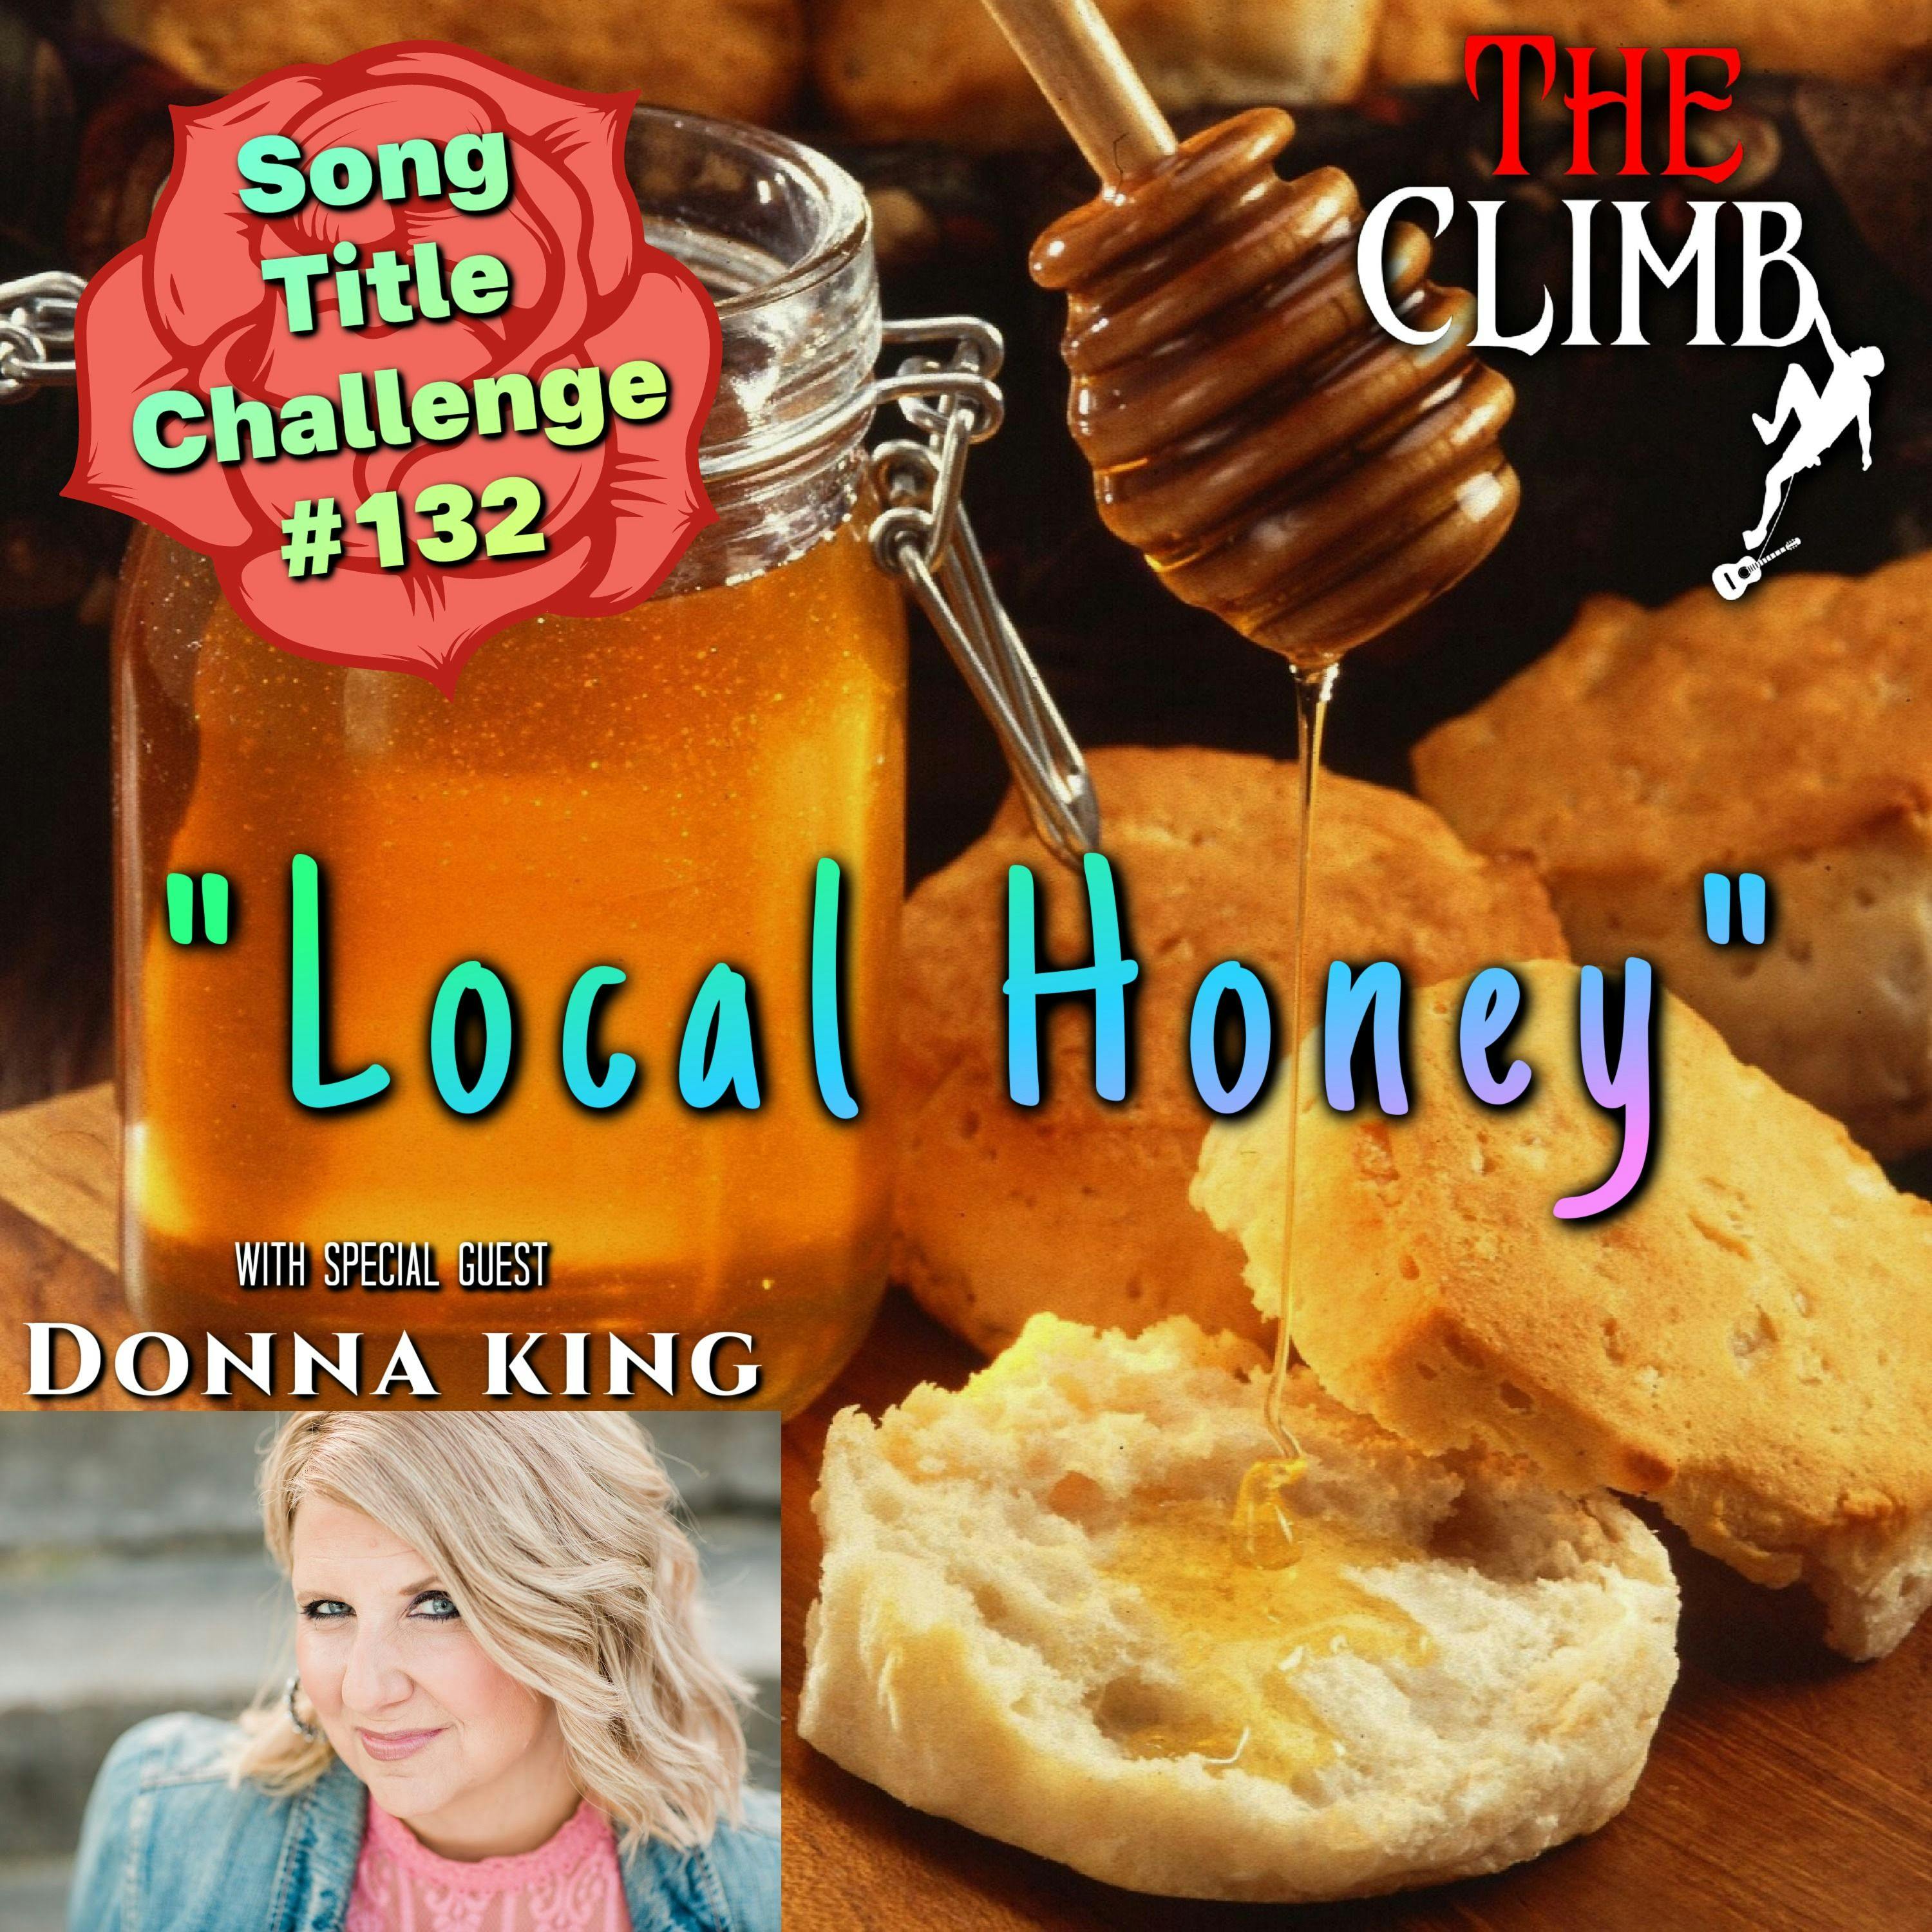 Song Title Challenge #132: ”Local Honey” with Donna King